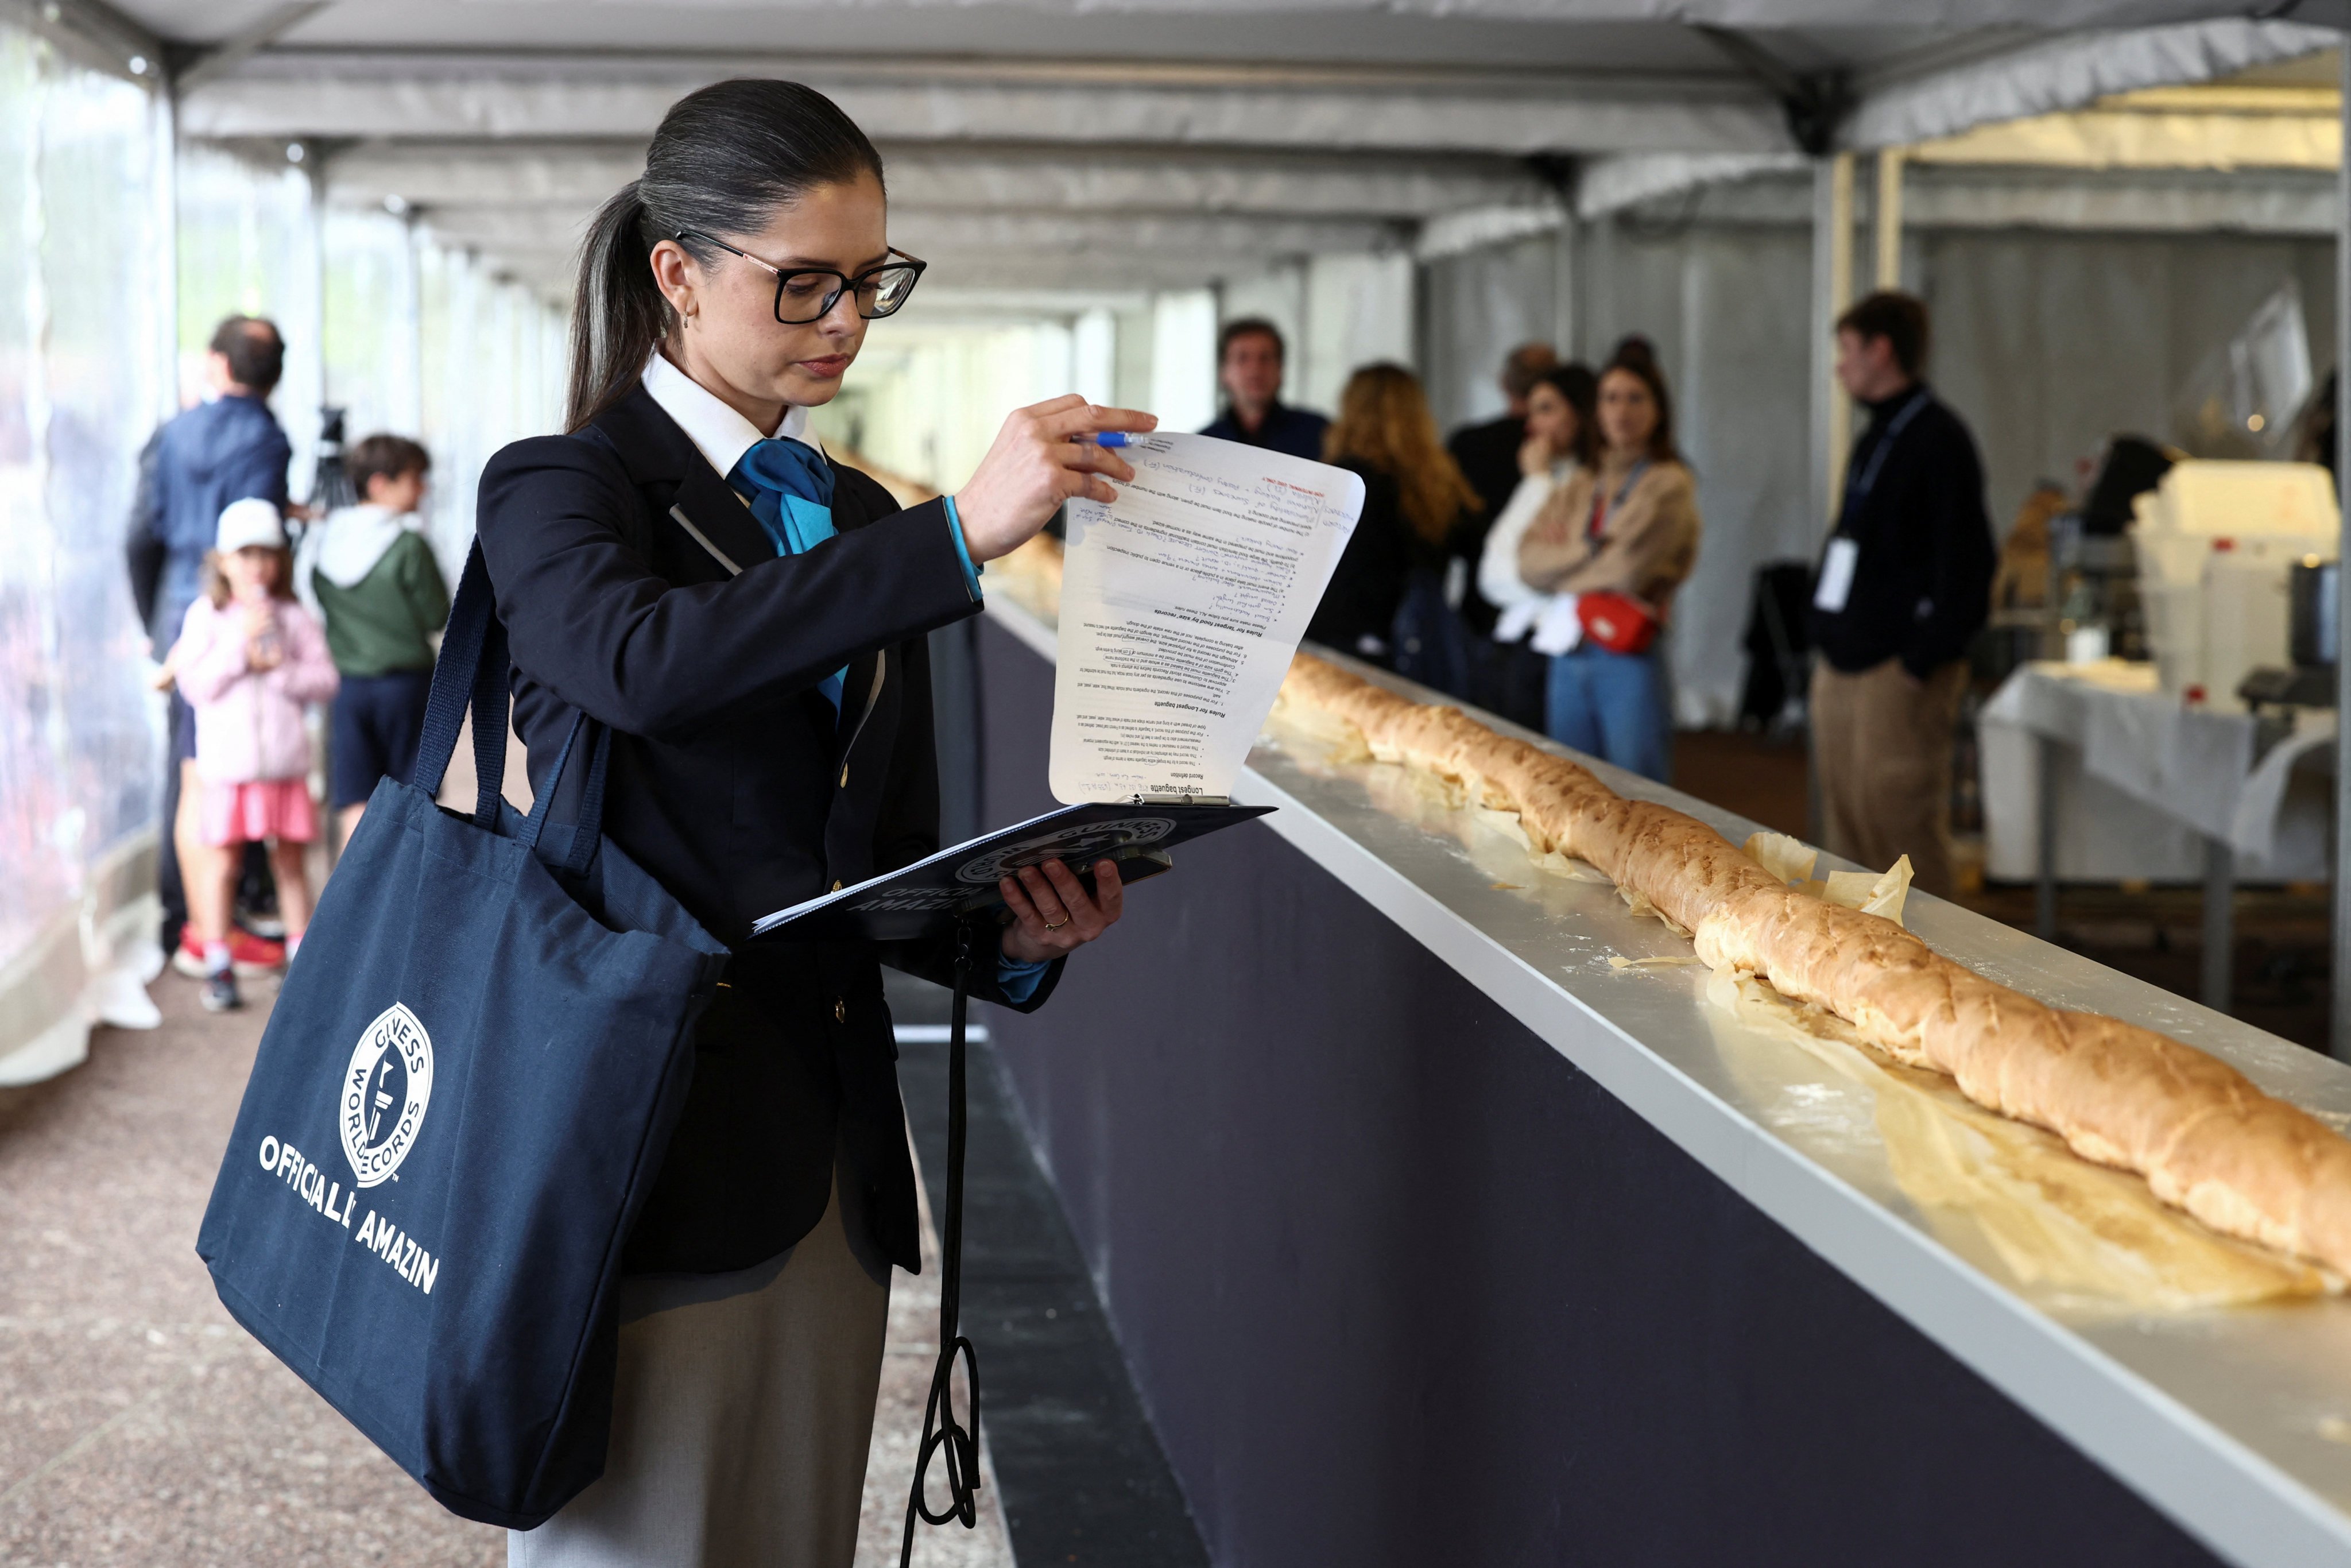 Joanne Brent, adjudicator of the Guinness World Records, stands near the baguette during her inspection of an attempt to beat the world record for the longest baguette. Photo: Reuters